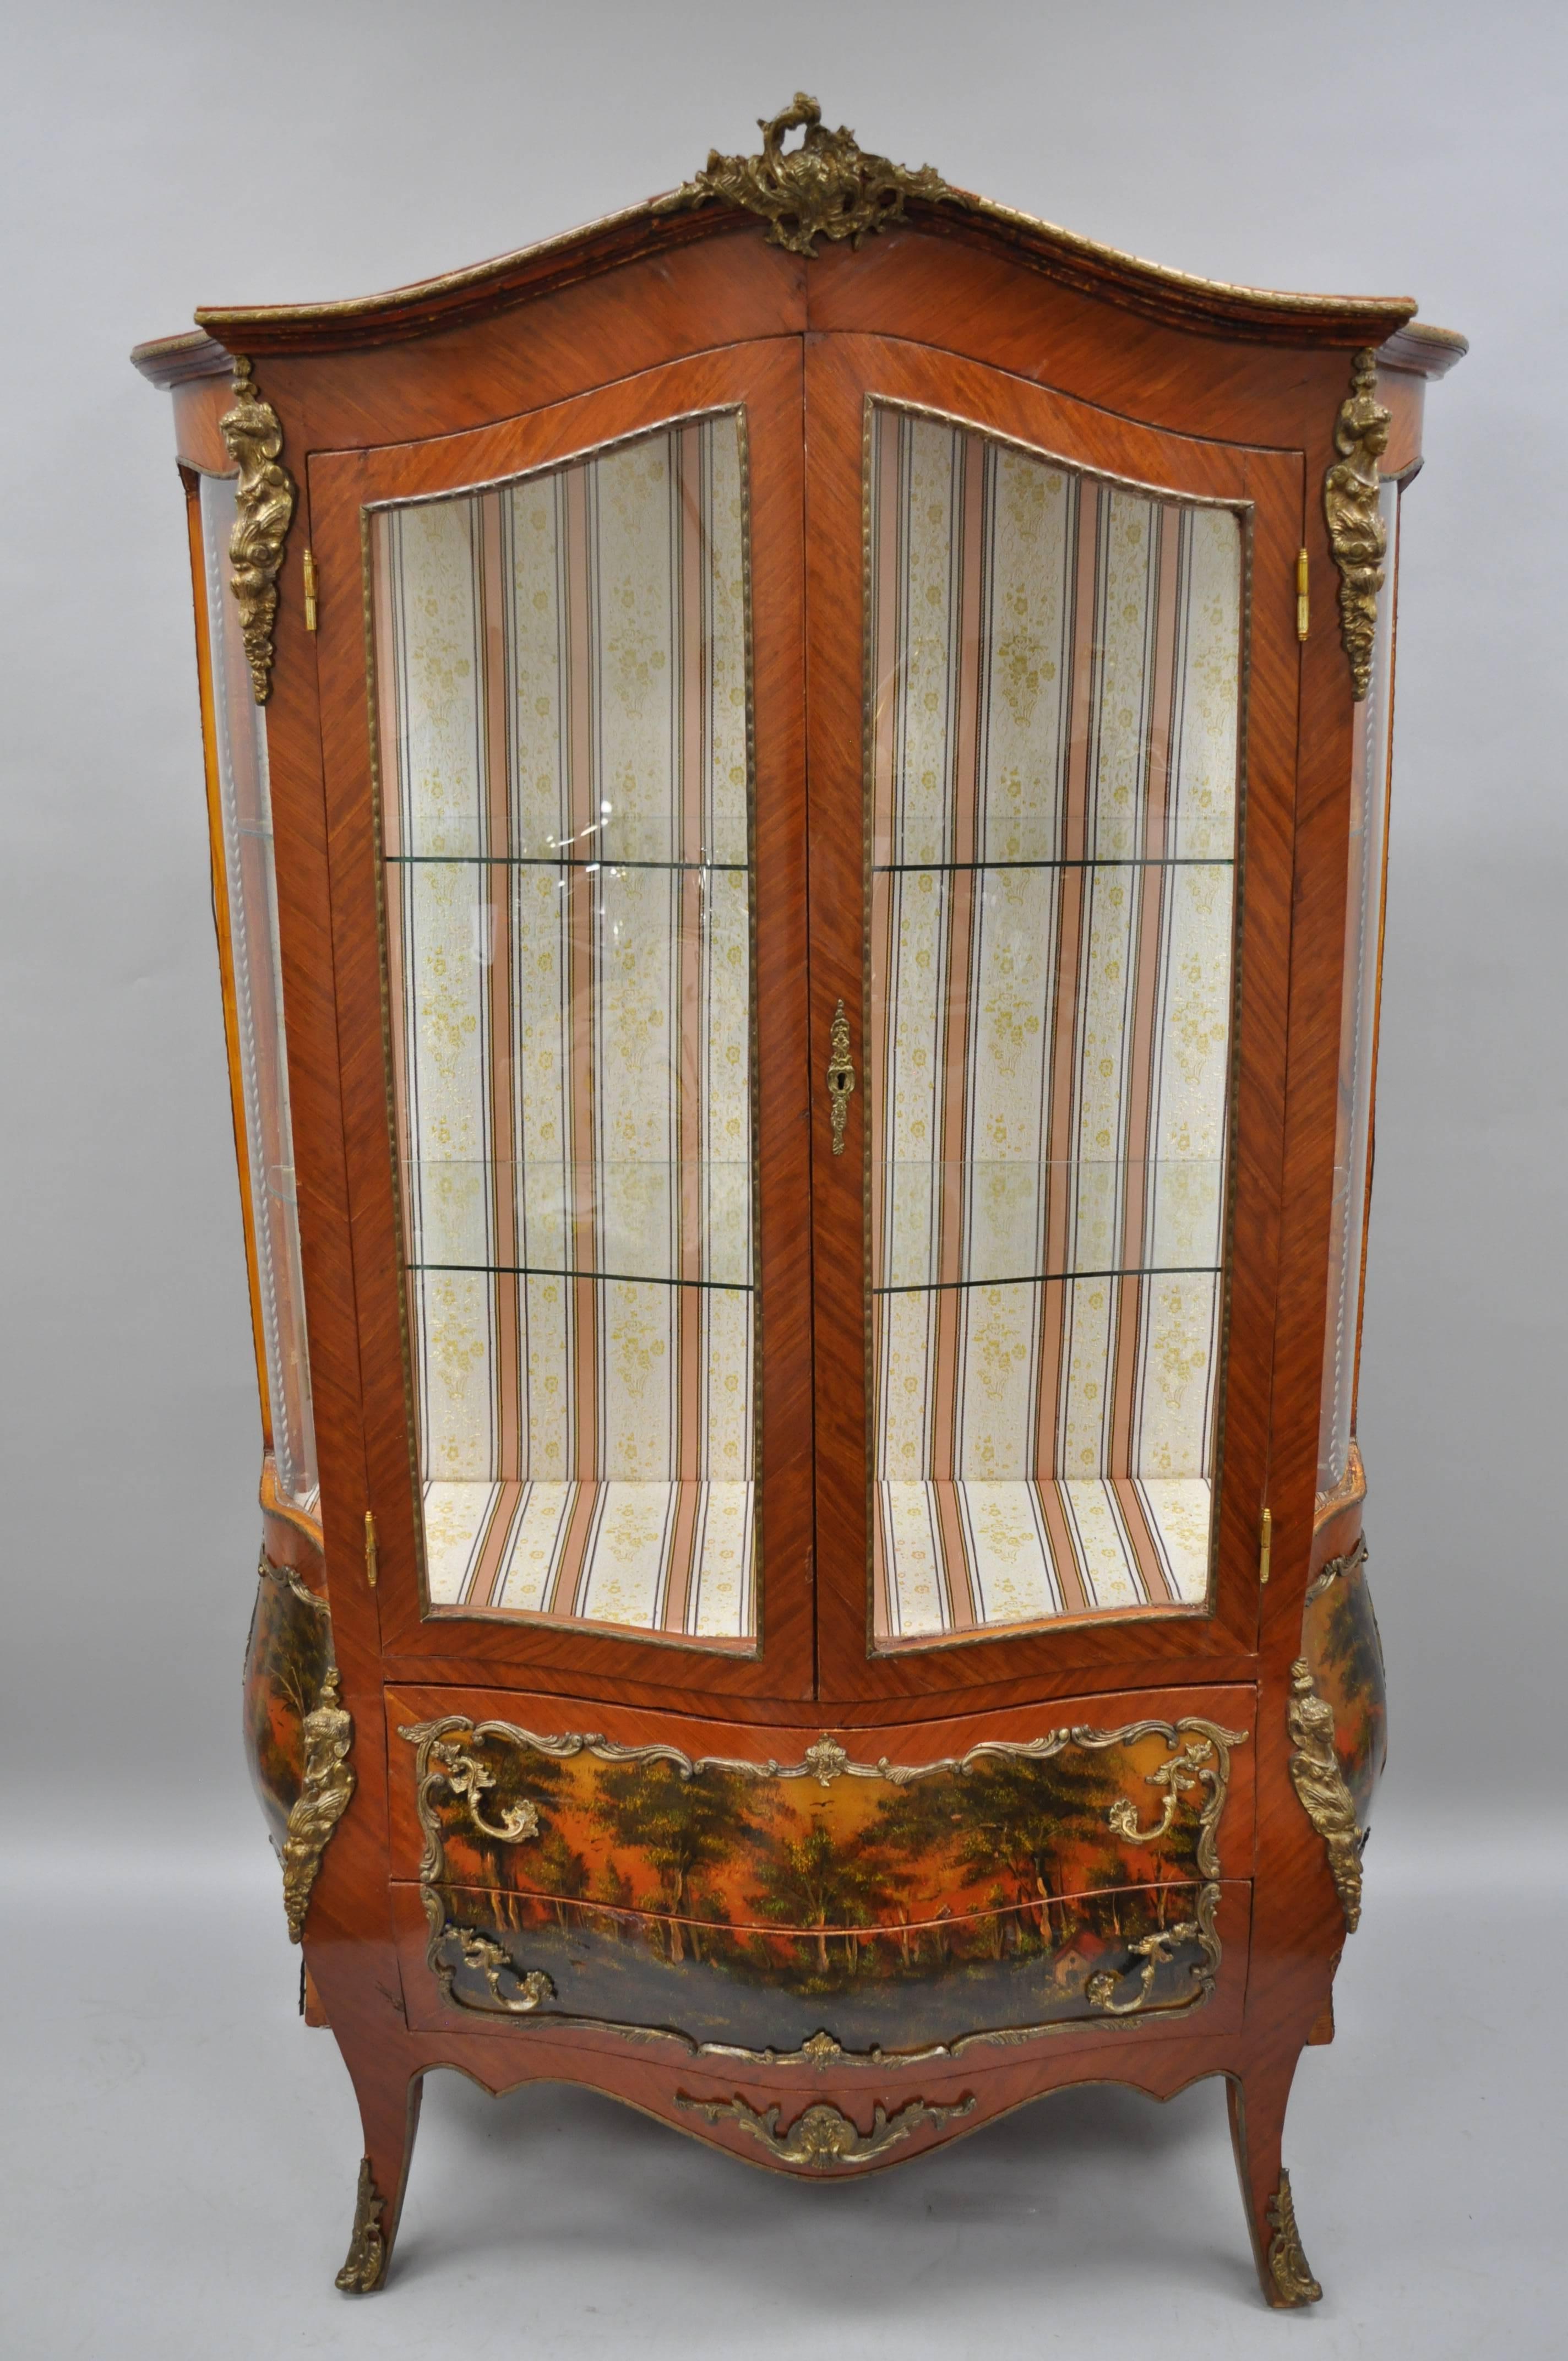 Louis XV French style reproduction bombe curio cabinet vitrine with bronze ormolu. Item features figural bronze ormolu, upholstered interior, bombe form, four curved glass exterior panels, painted scenes, two shaped glass shelves, great style and